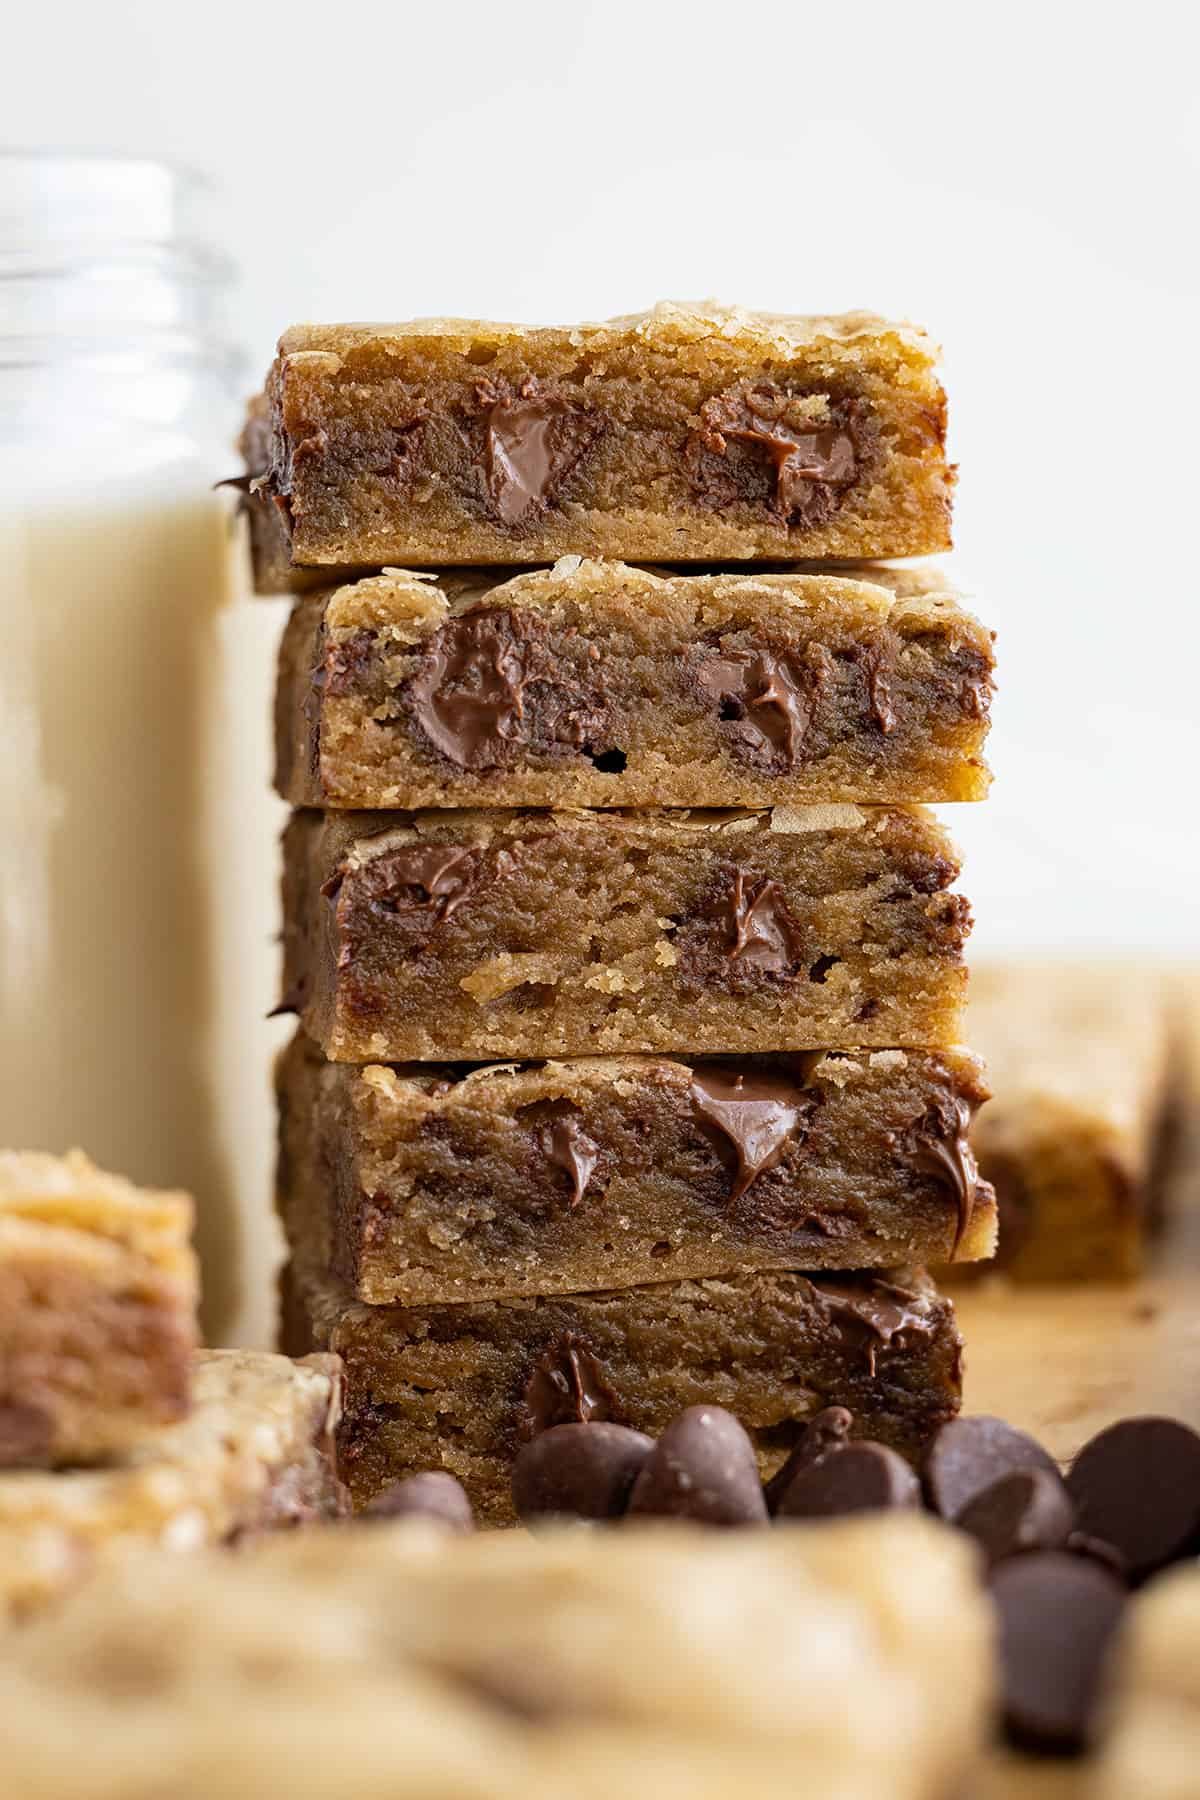 Tall stack of chocolate chip cookie bars next to a tall glass of milk.